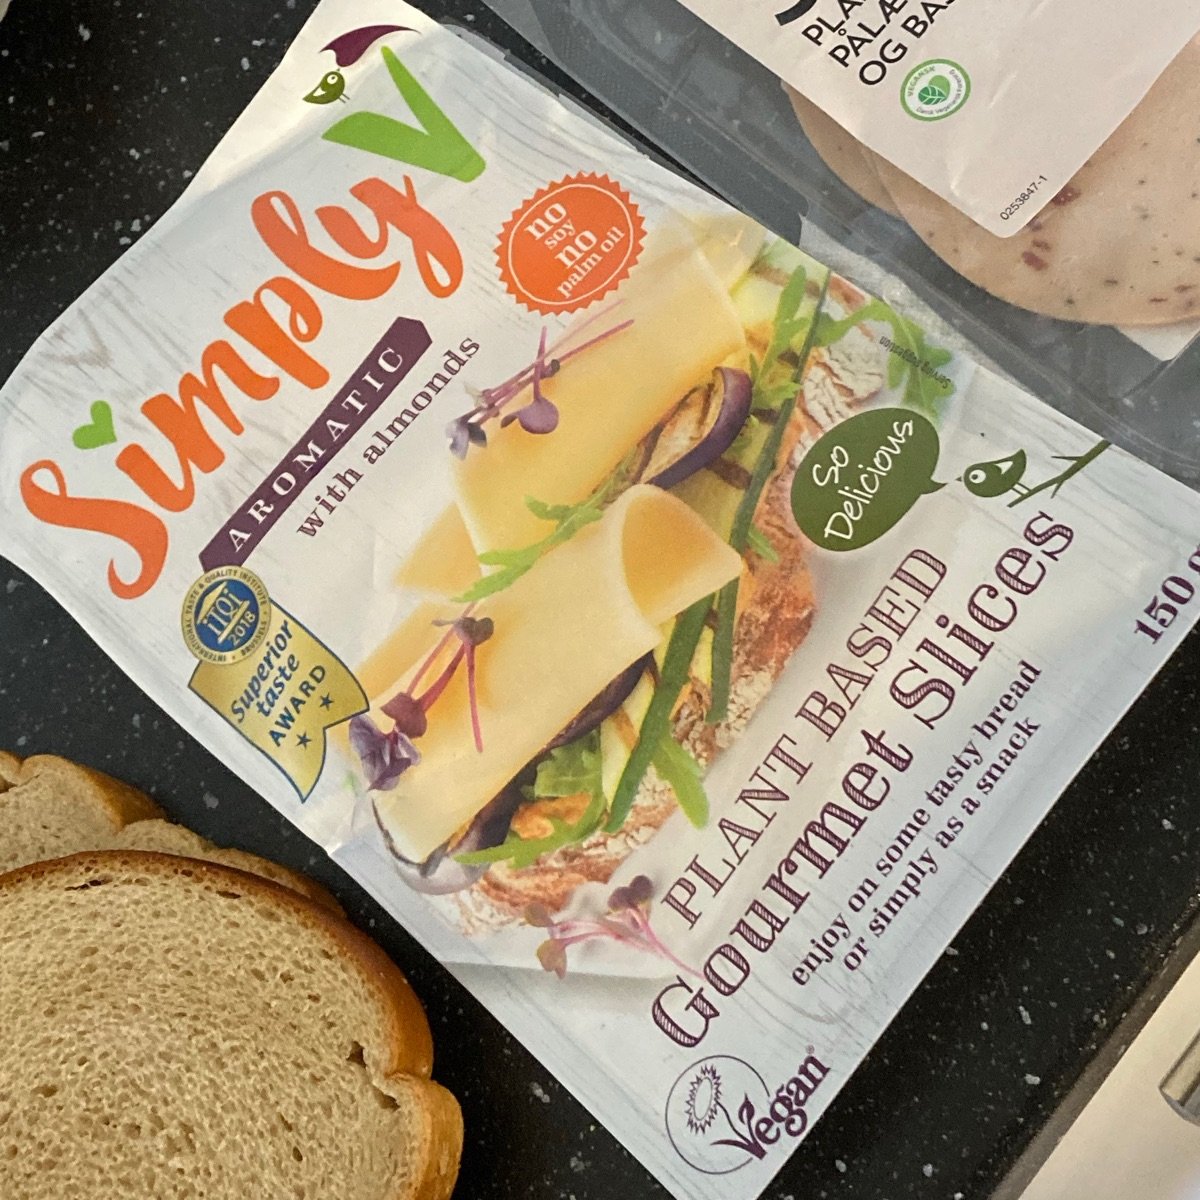 Simply V Aromatic Plant Based Gourmet Slices Reviews